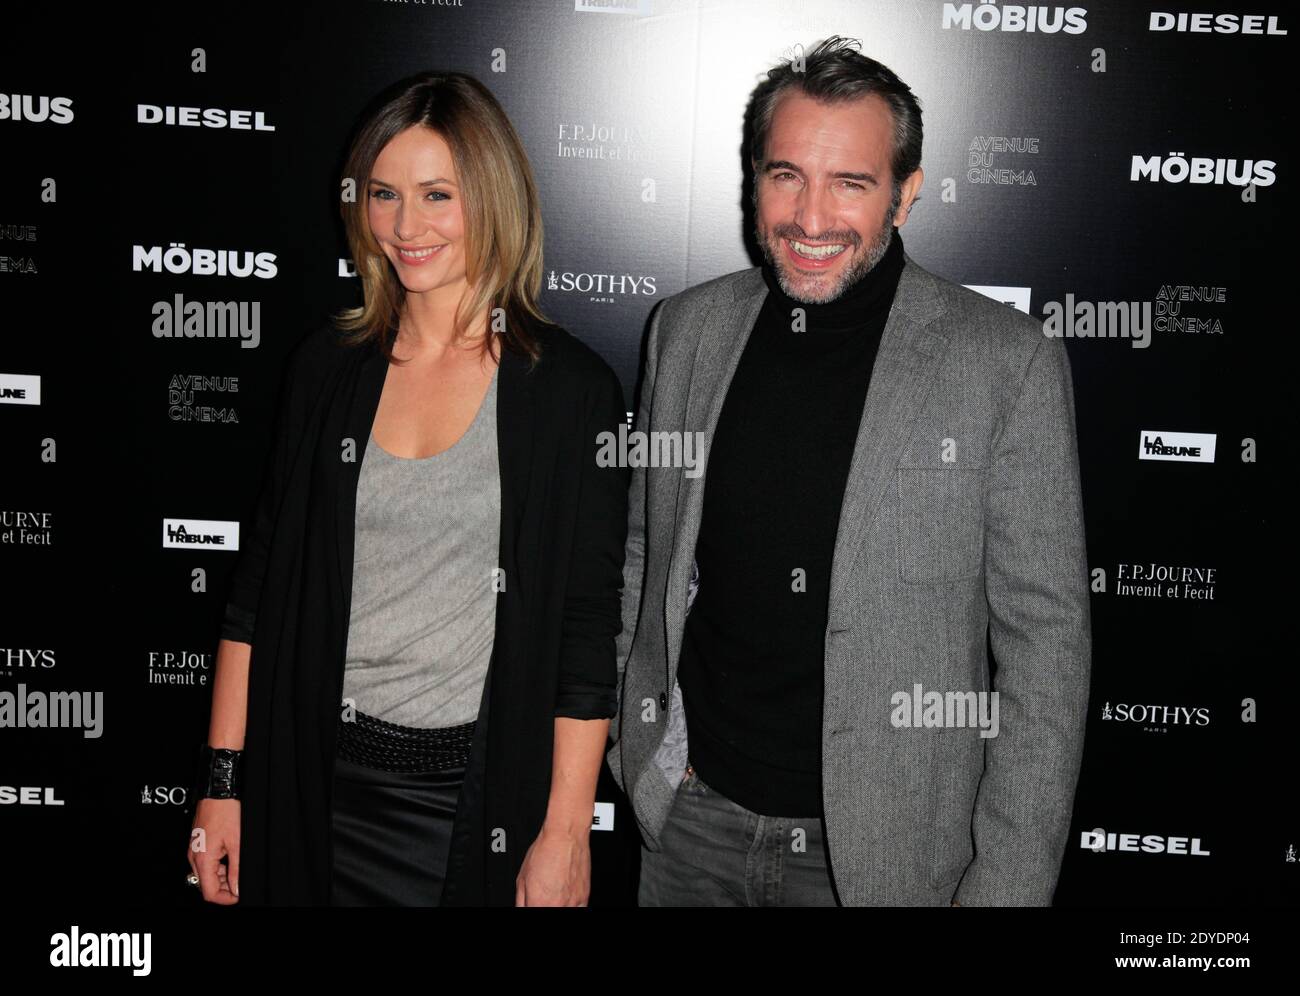 Cecile de France and Jean Dujardin attending the premiere of 'Mobius ...